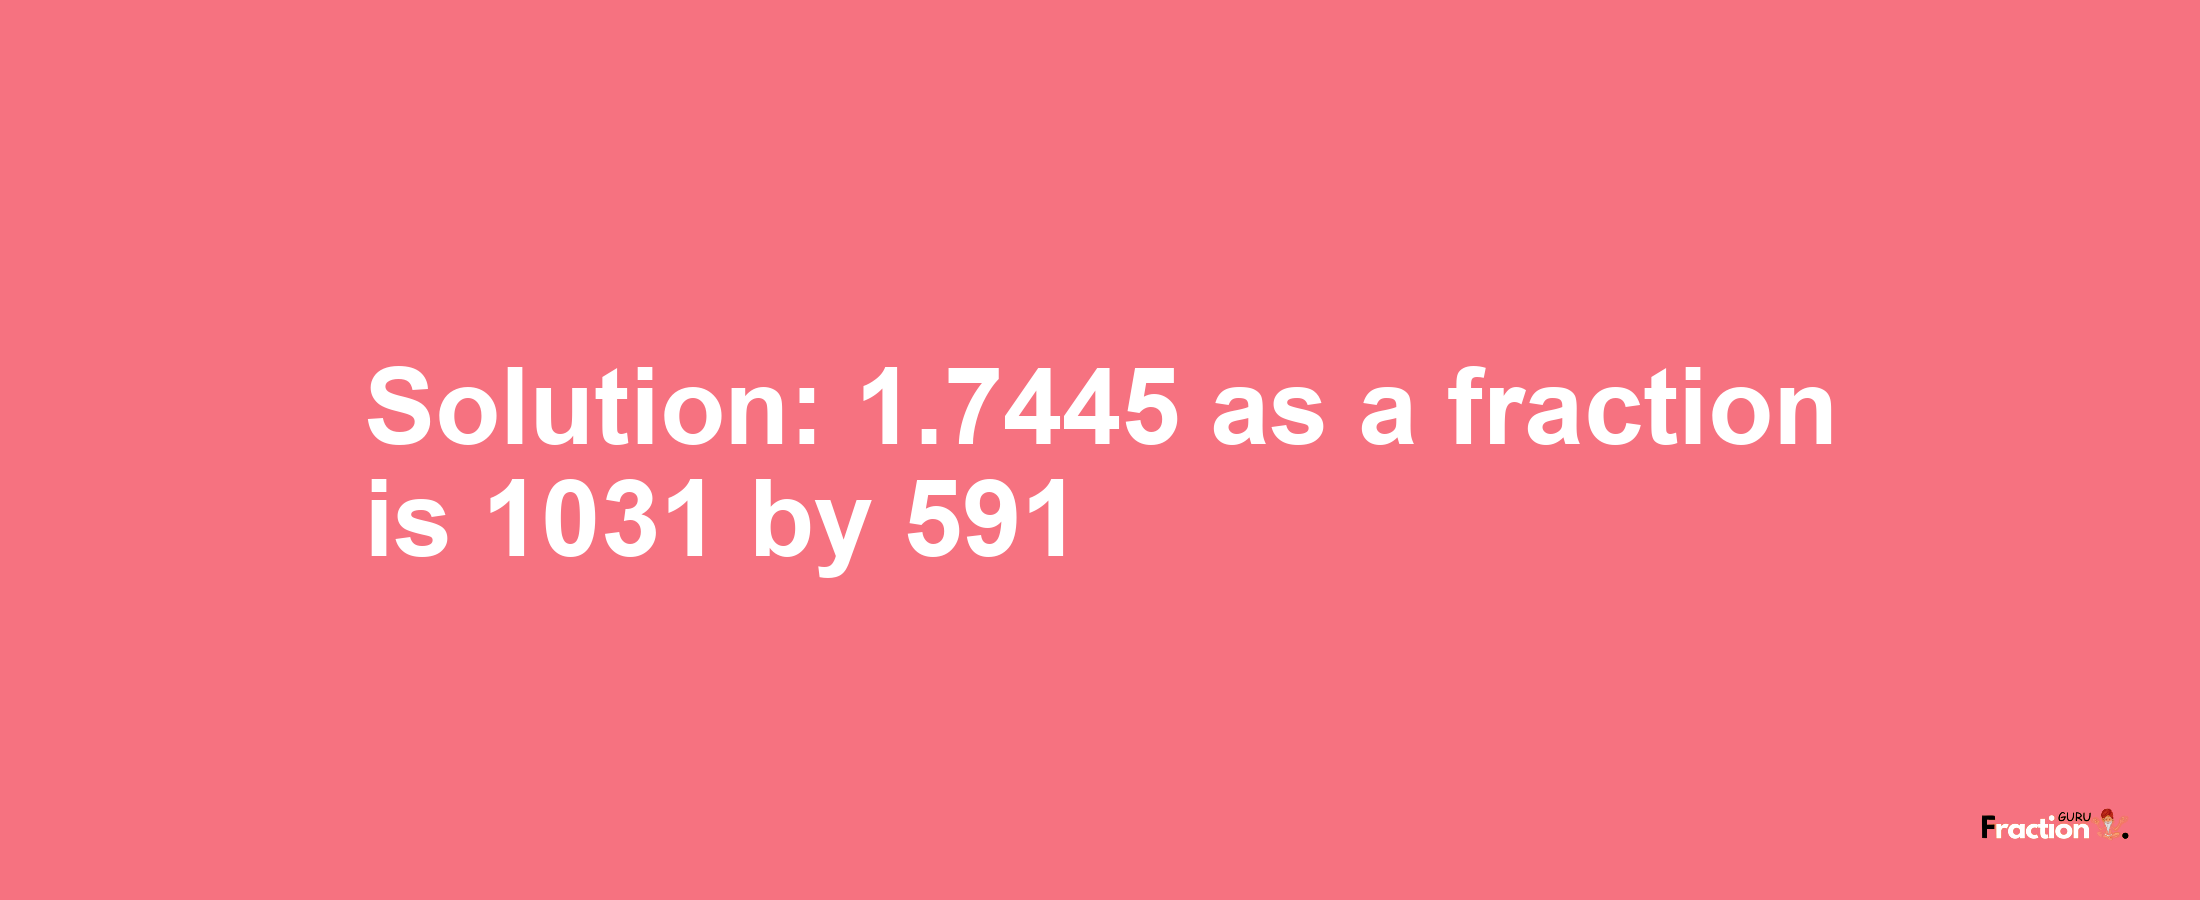 Solution:1.7445 as a fraction is 1031/591